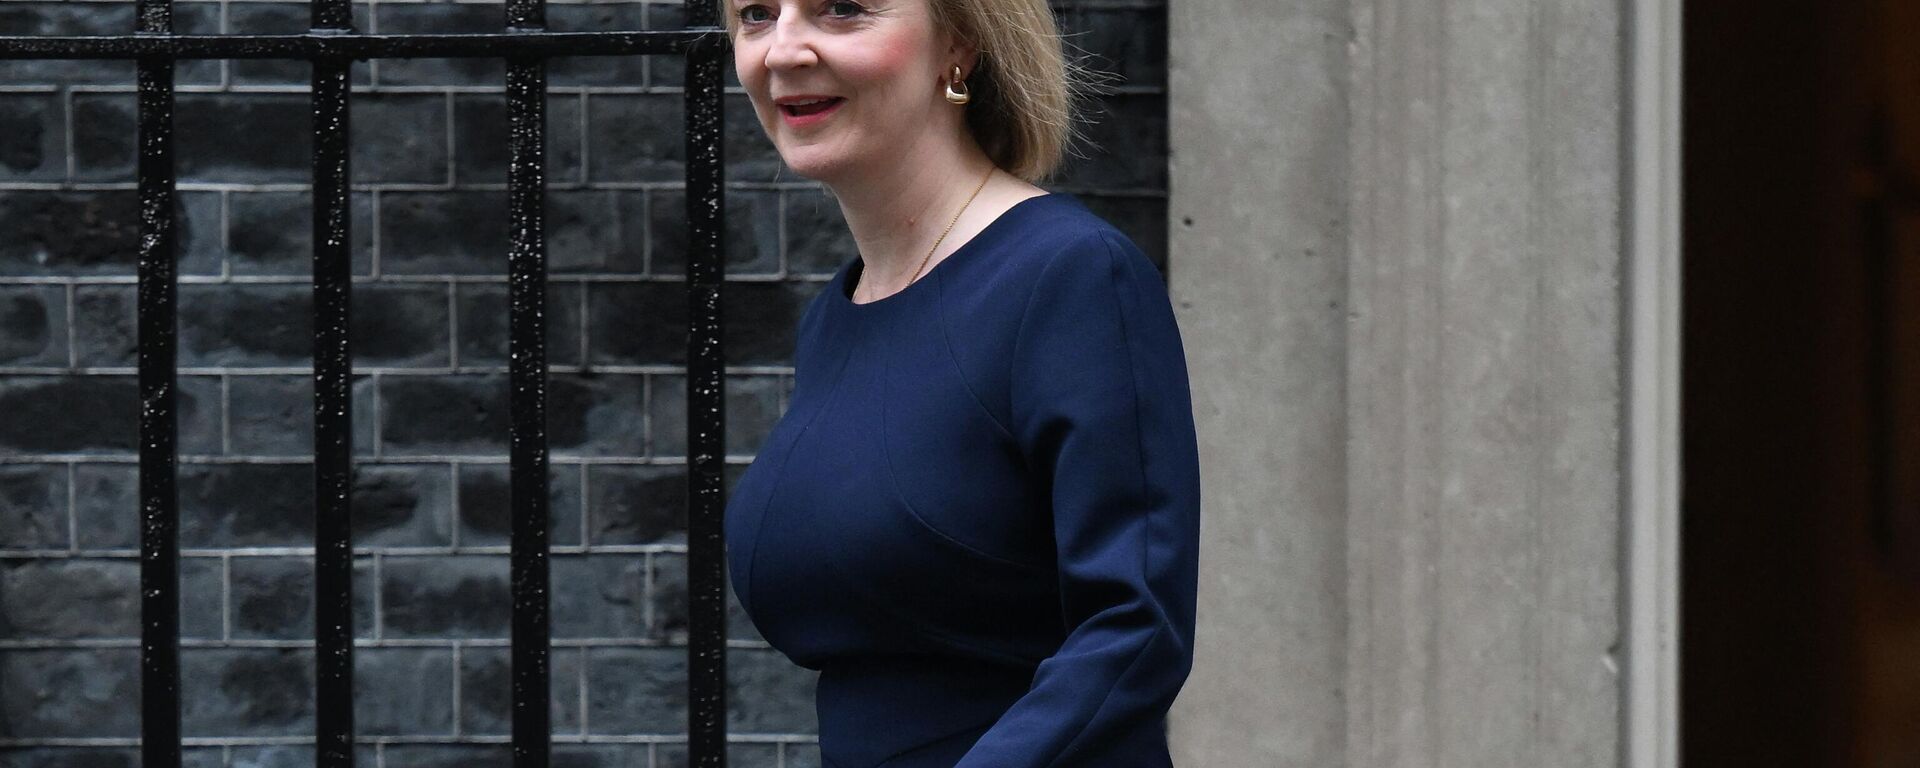 Britain's Prime Minister Liz Truss walks out of Number 10 Downing Street on her way to the House of Commons for the government's anti-inflation budget plan in London on September 23, 2022 - Sputnik International, 1920, 16.10.2022